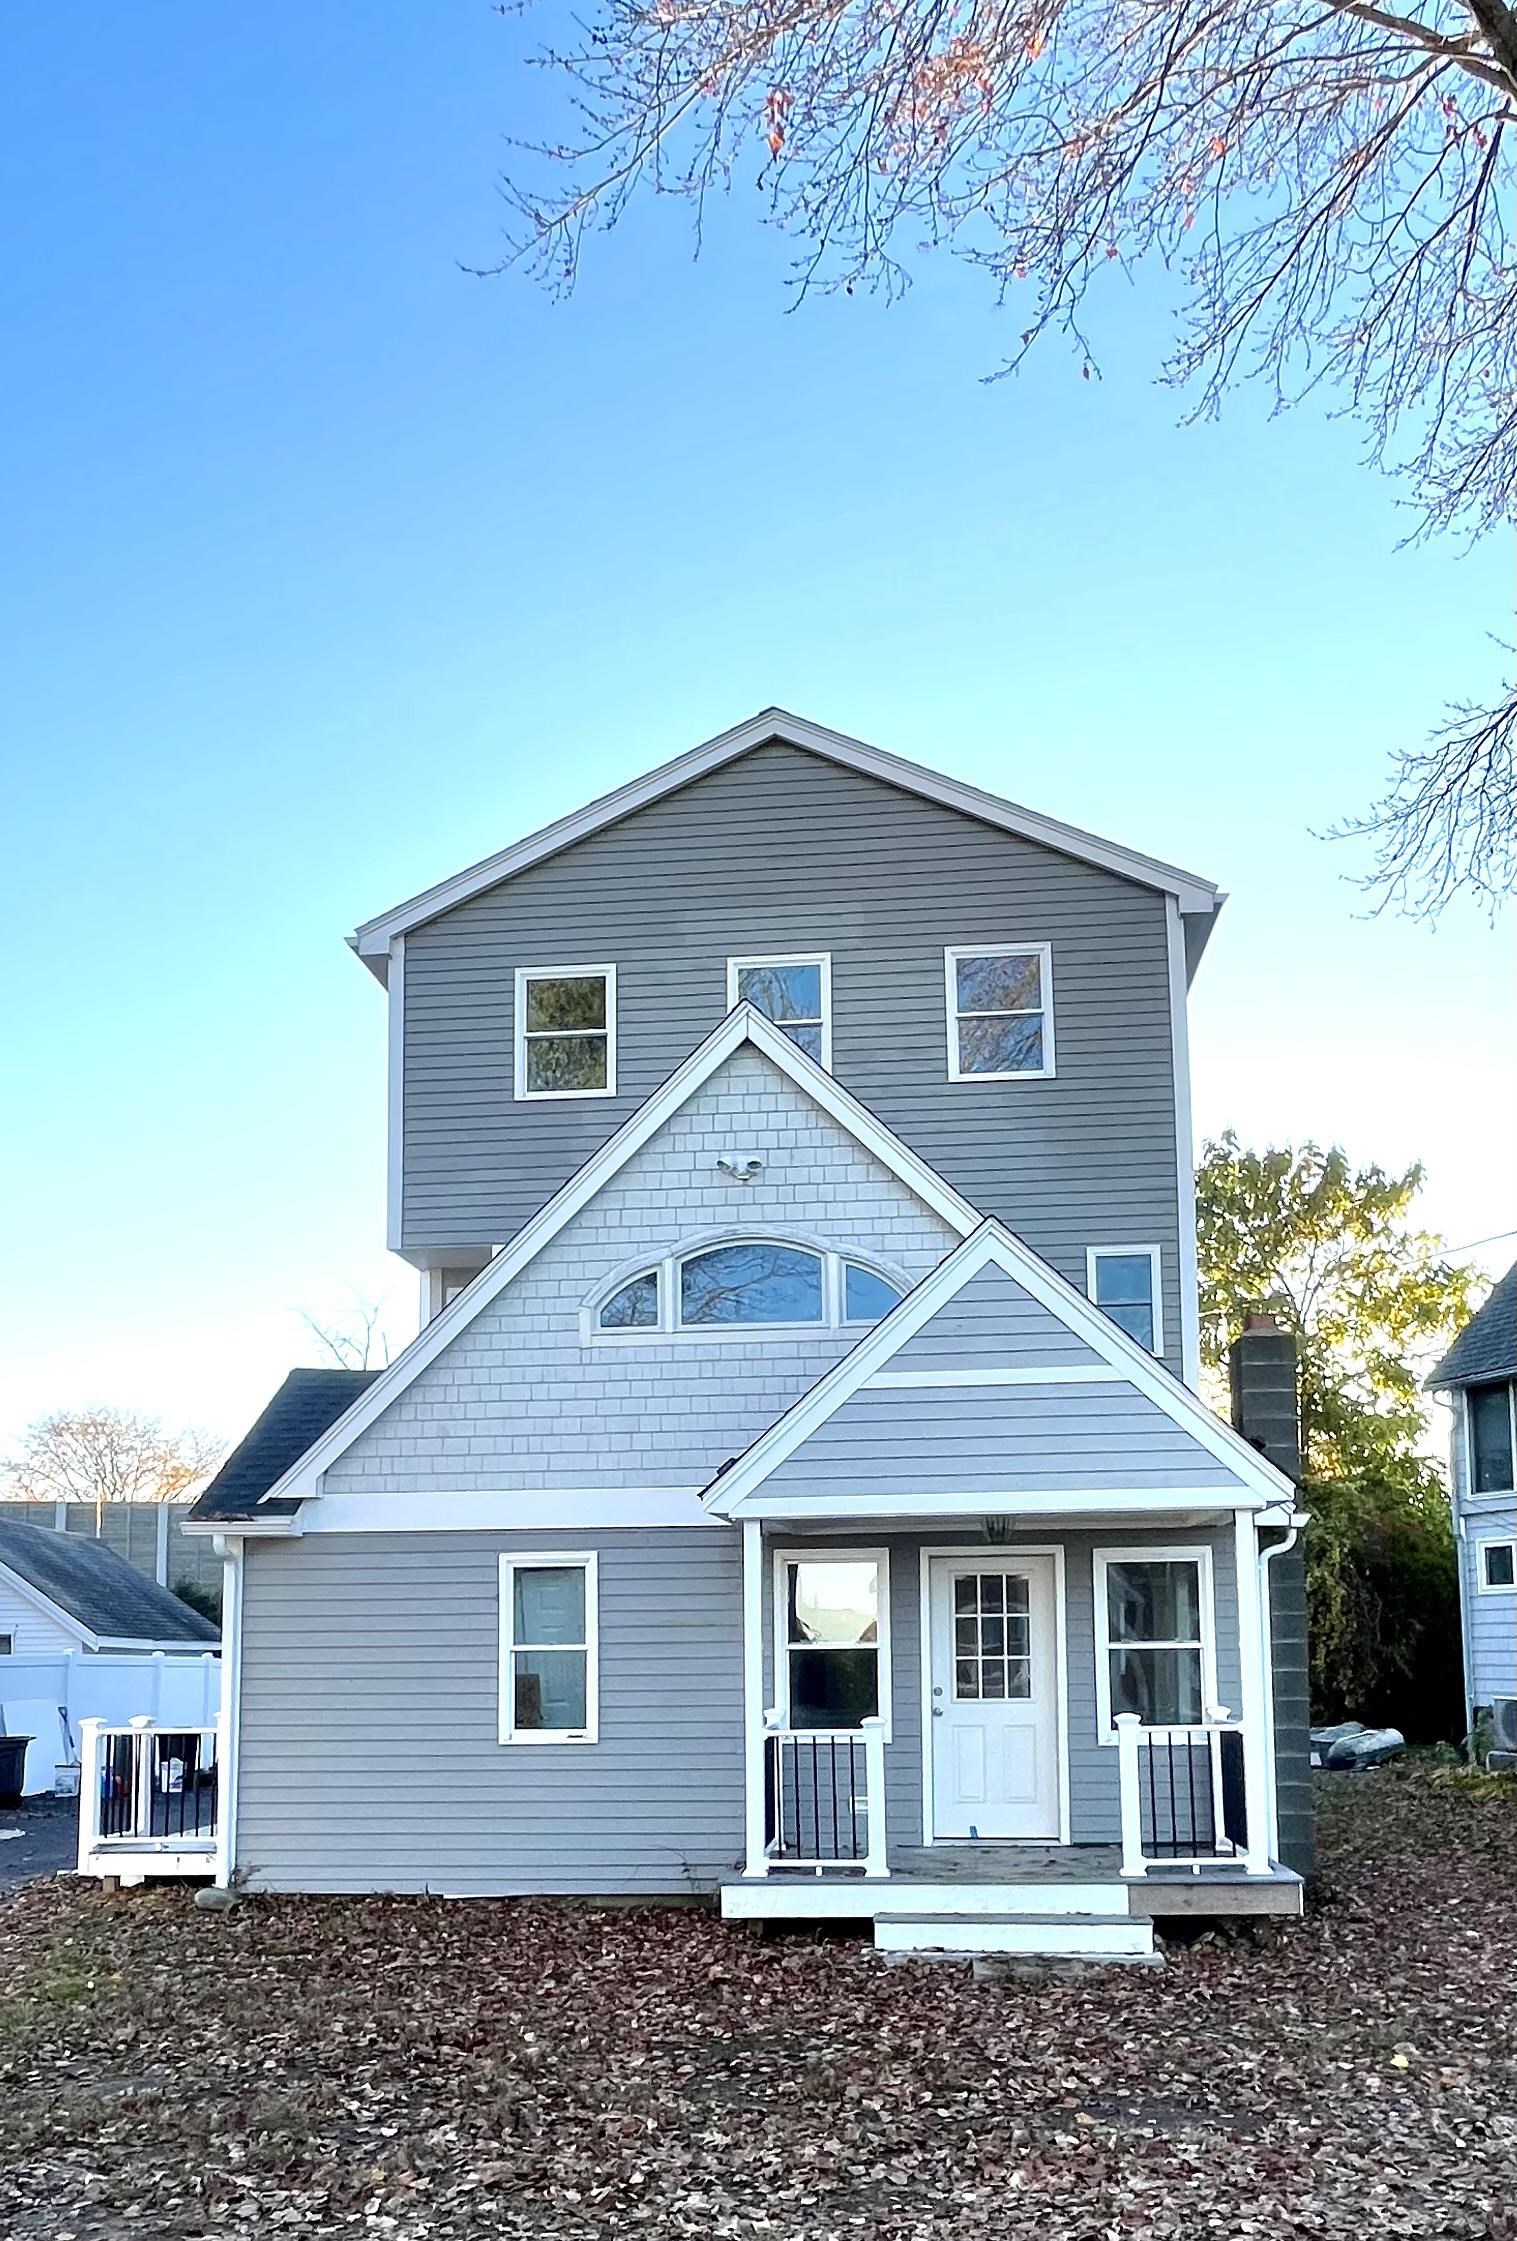 18 Wentworth Terrace, Dover, NH 03820